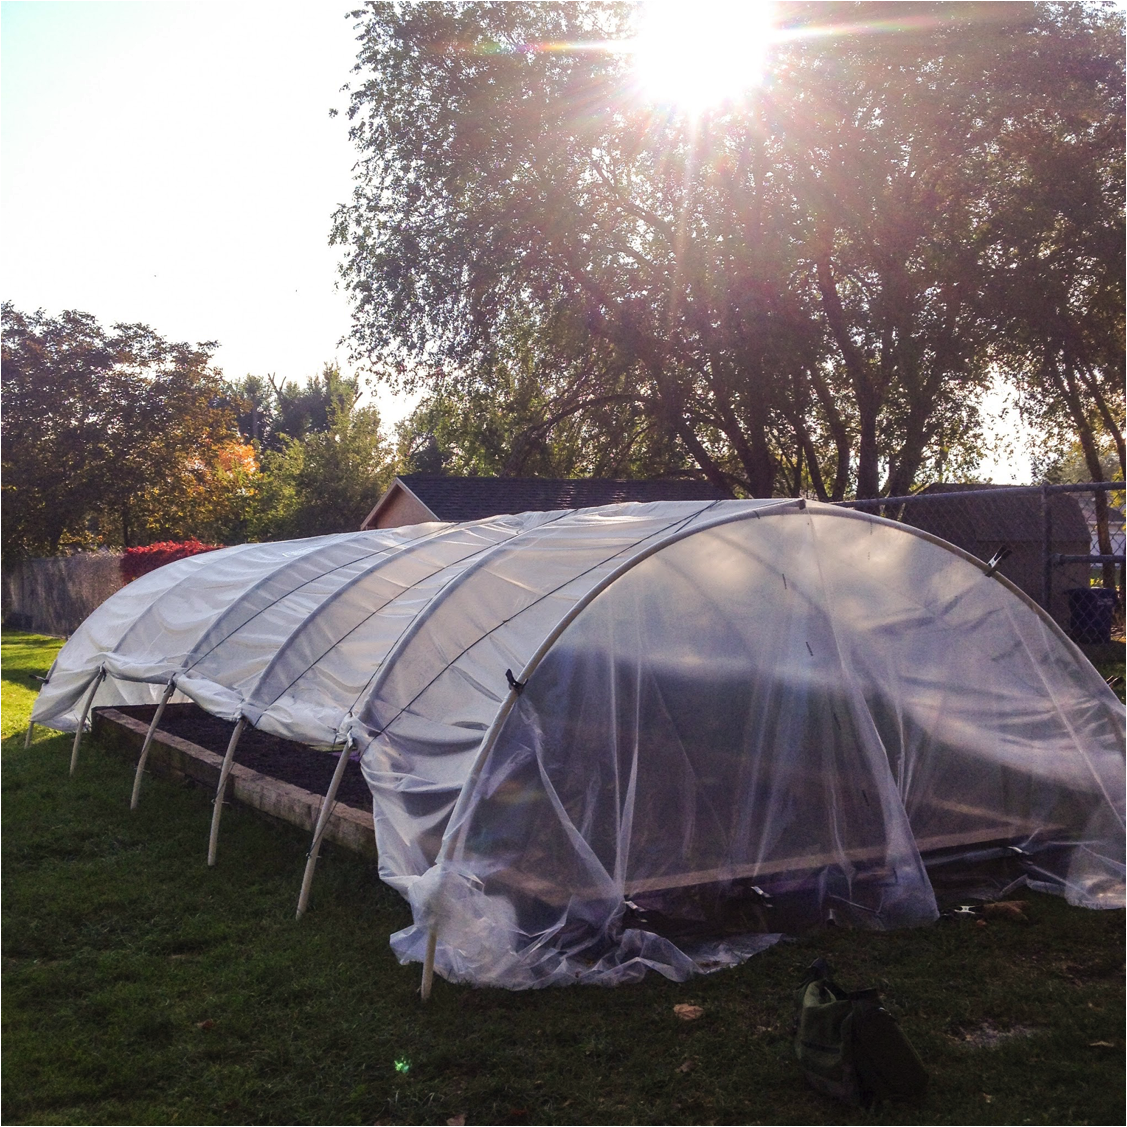 Building a hoop house to extend your garden